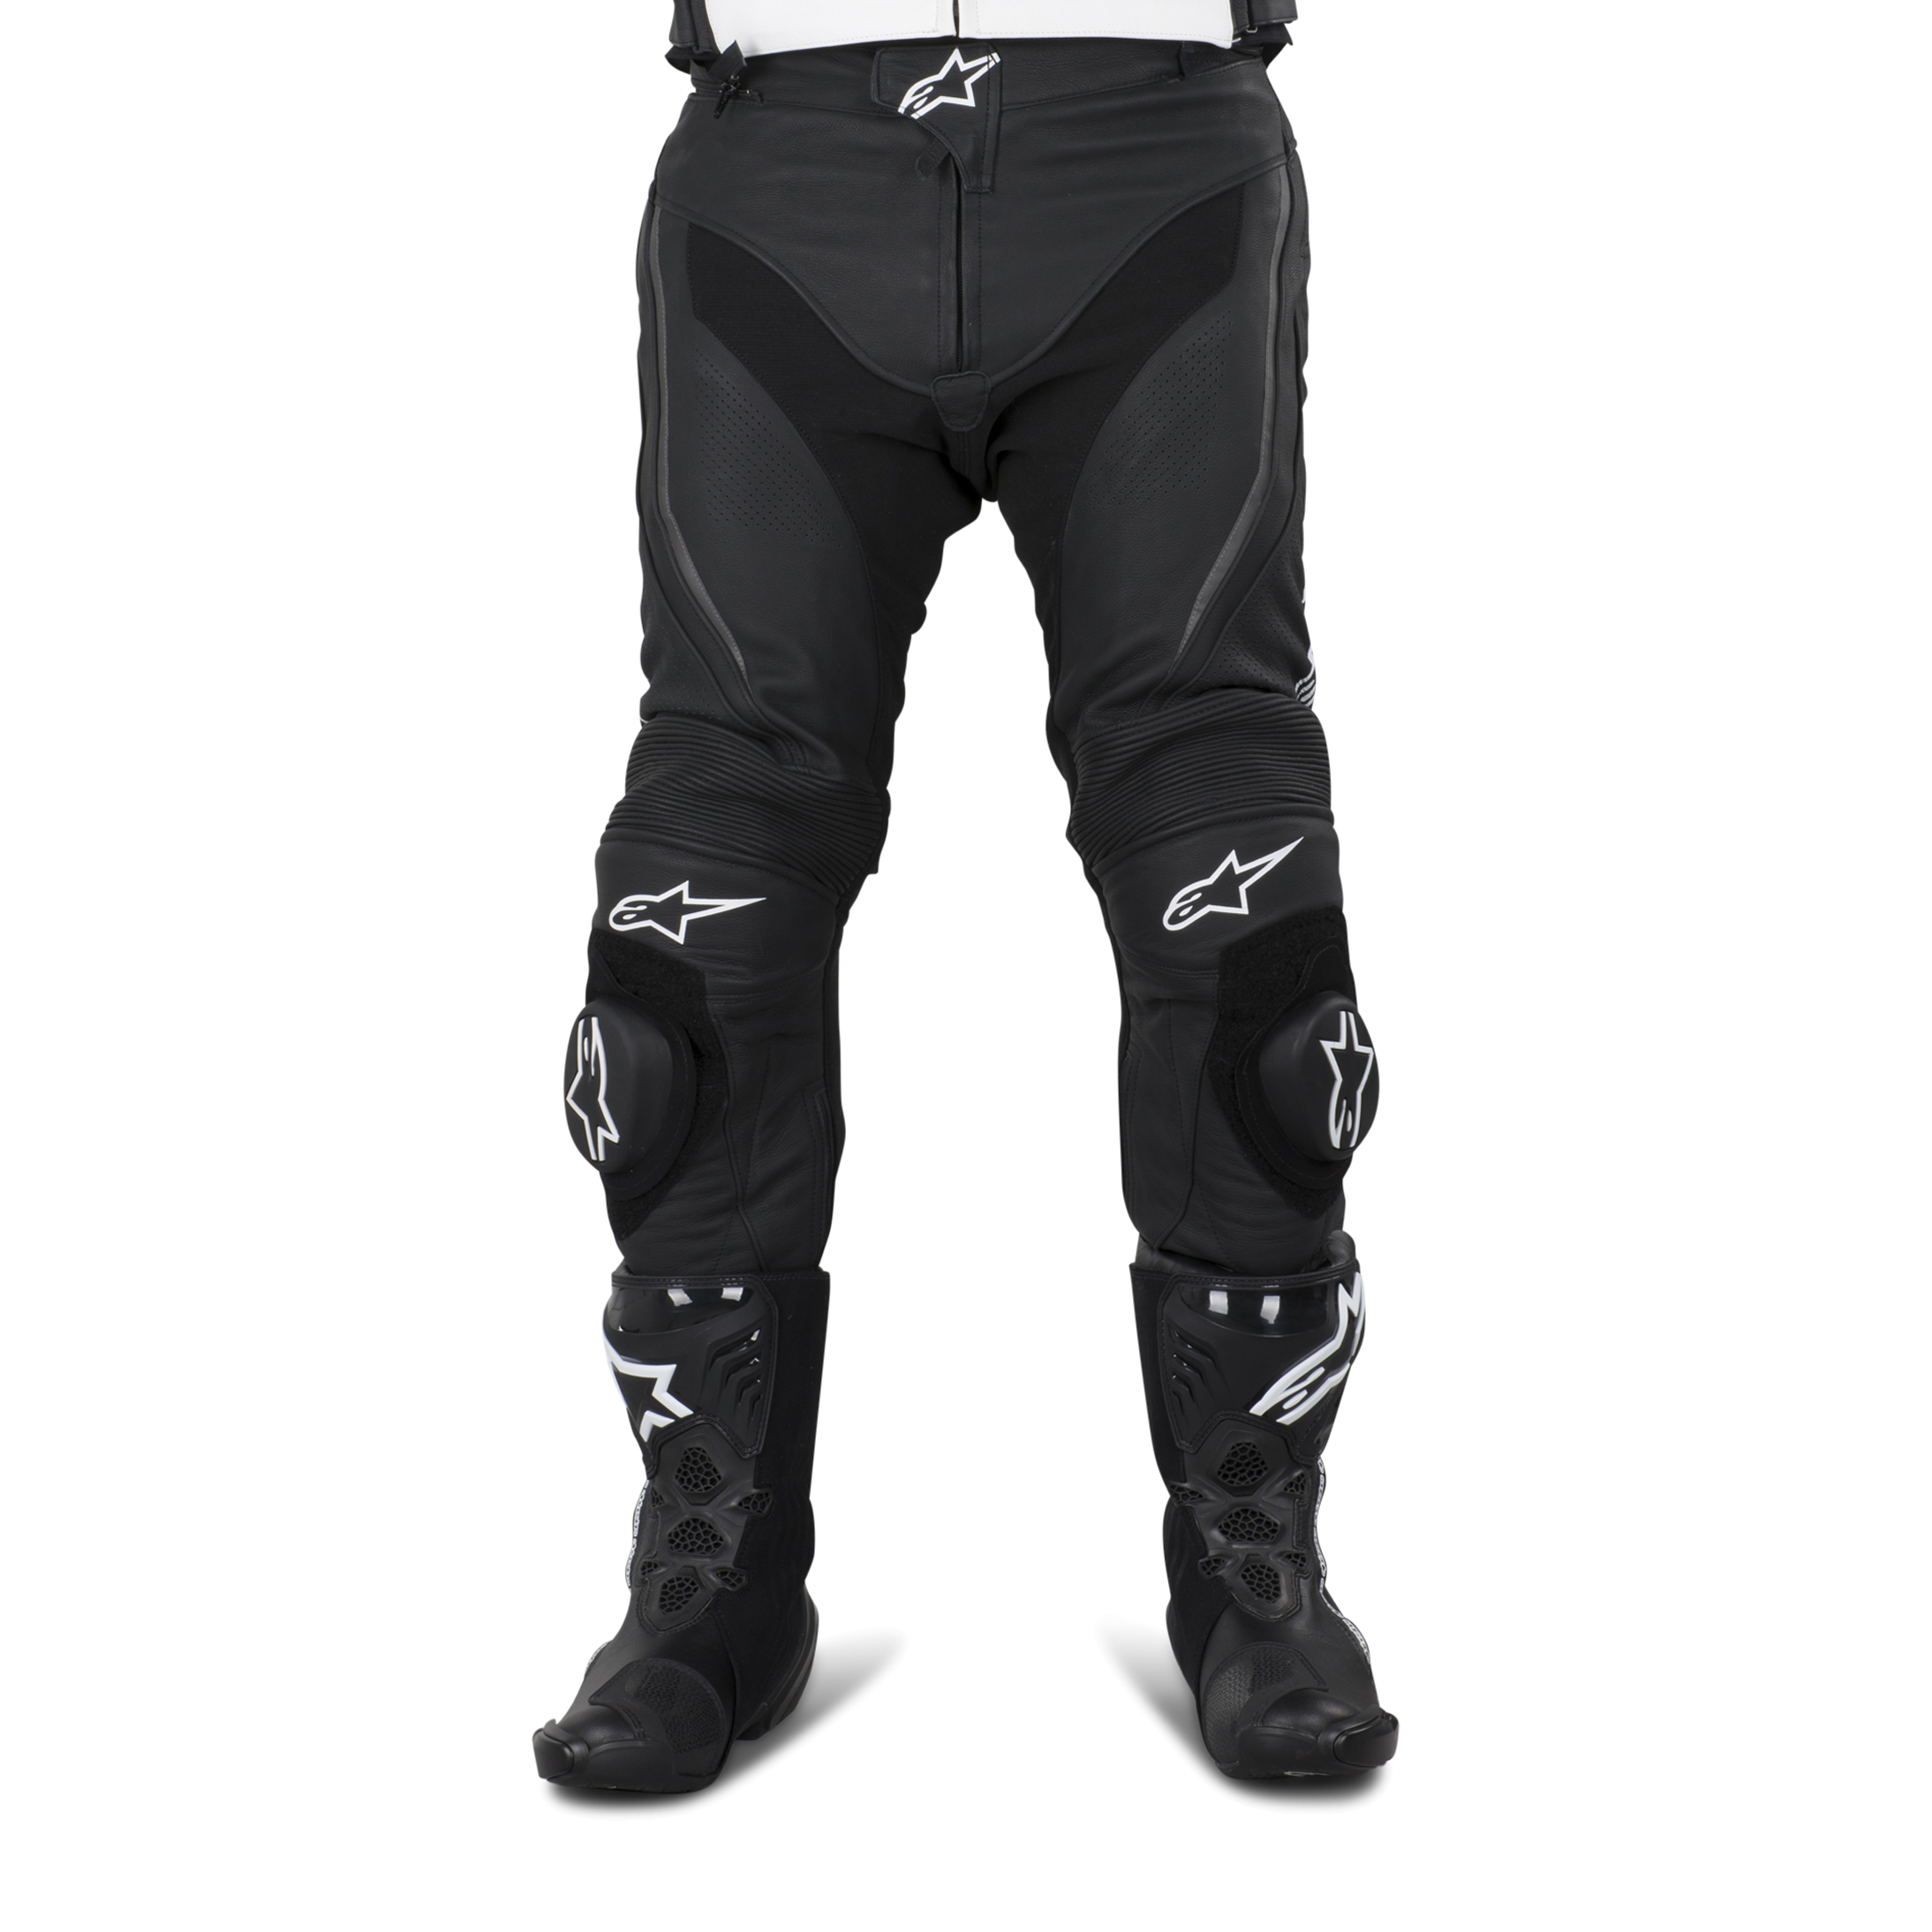 Alpinestars Missile V2 Airflow Mens Short Leather Motorcycle Riding Pants